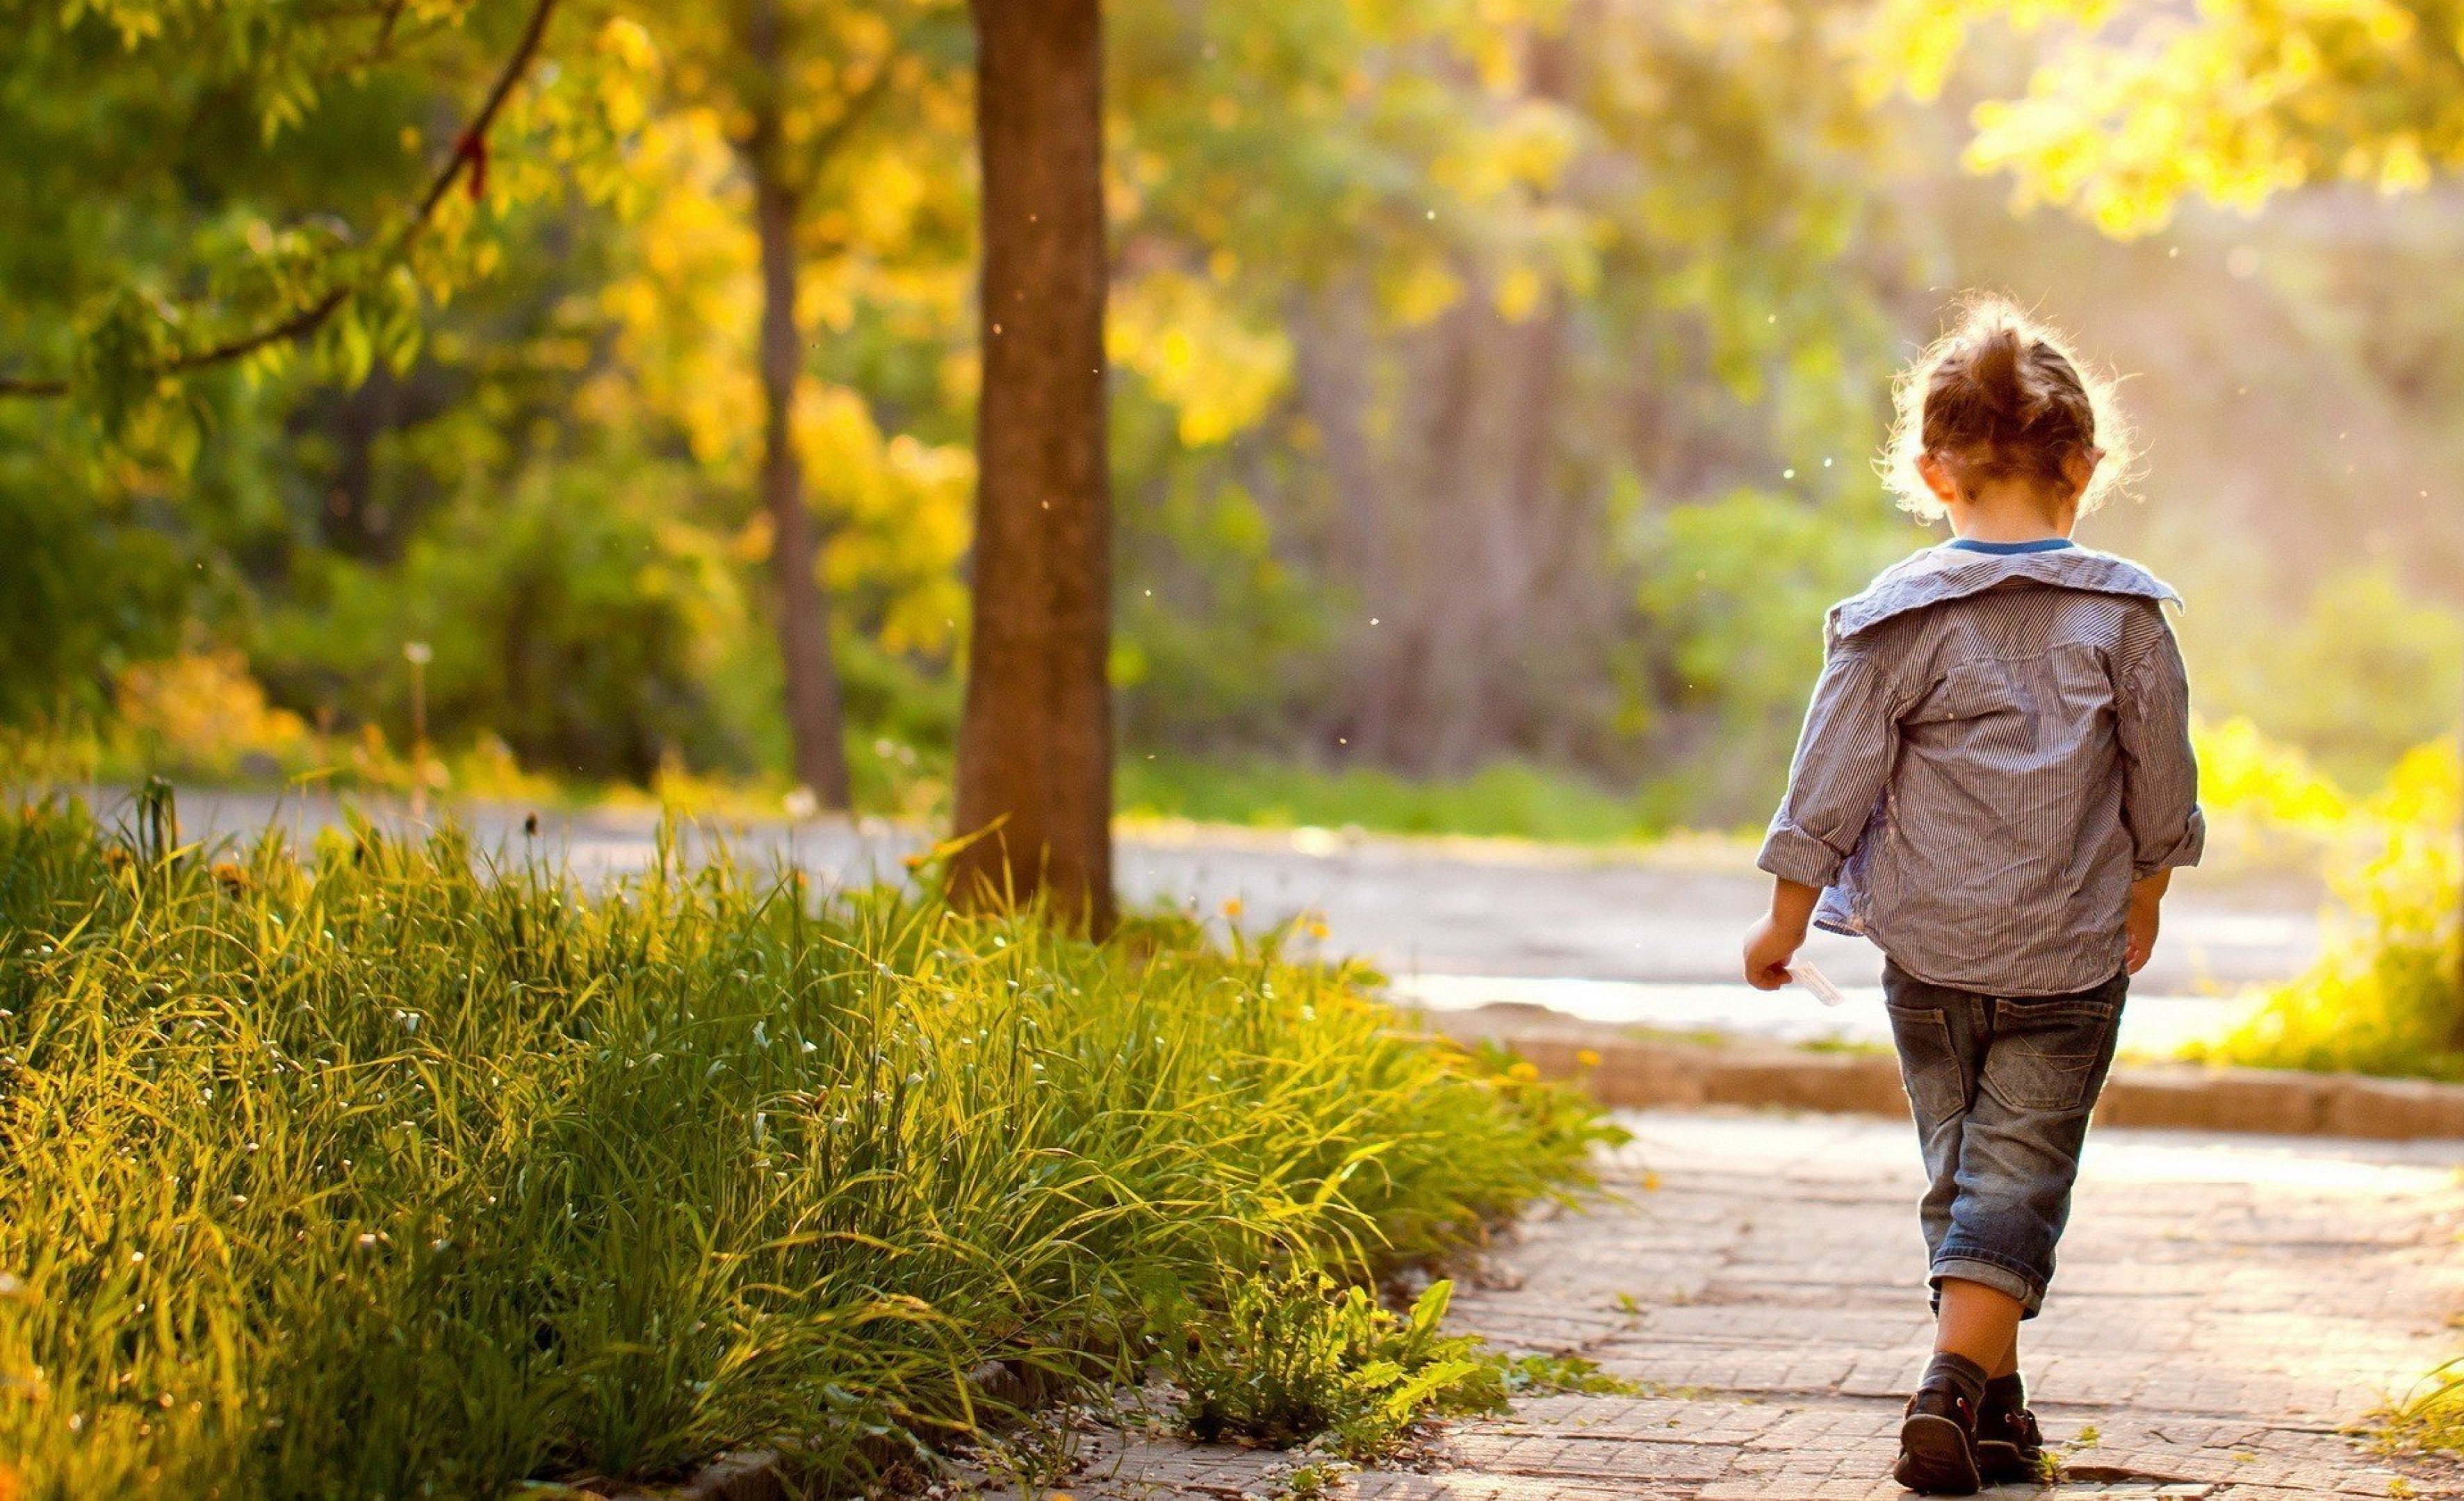 situation girl children child walk park alley nature grass green meadow tree tree leaves foliage blur background wallpaper widescreen full screen widescreen HD wallpaper background wallpaper widescreen.com • 4K 5k